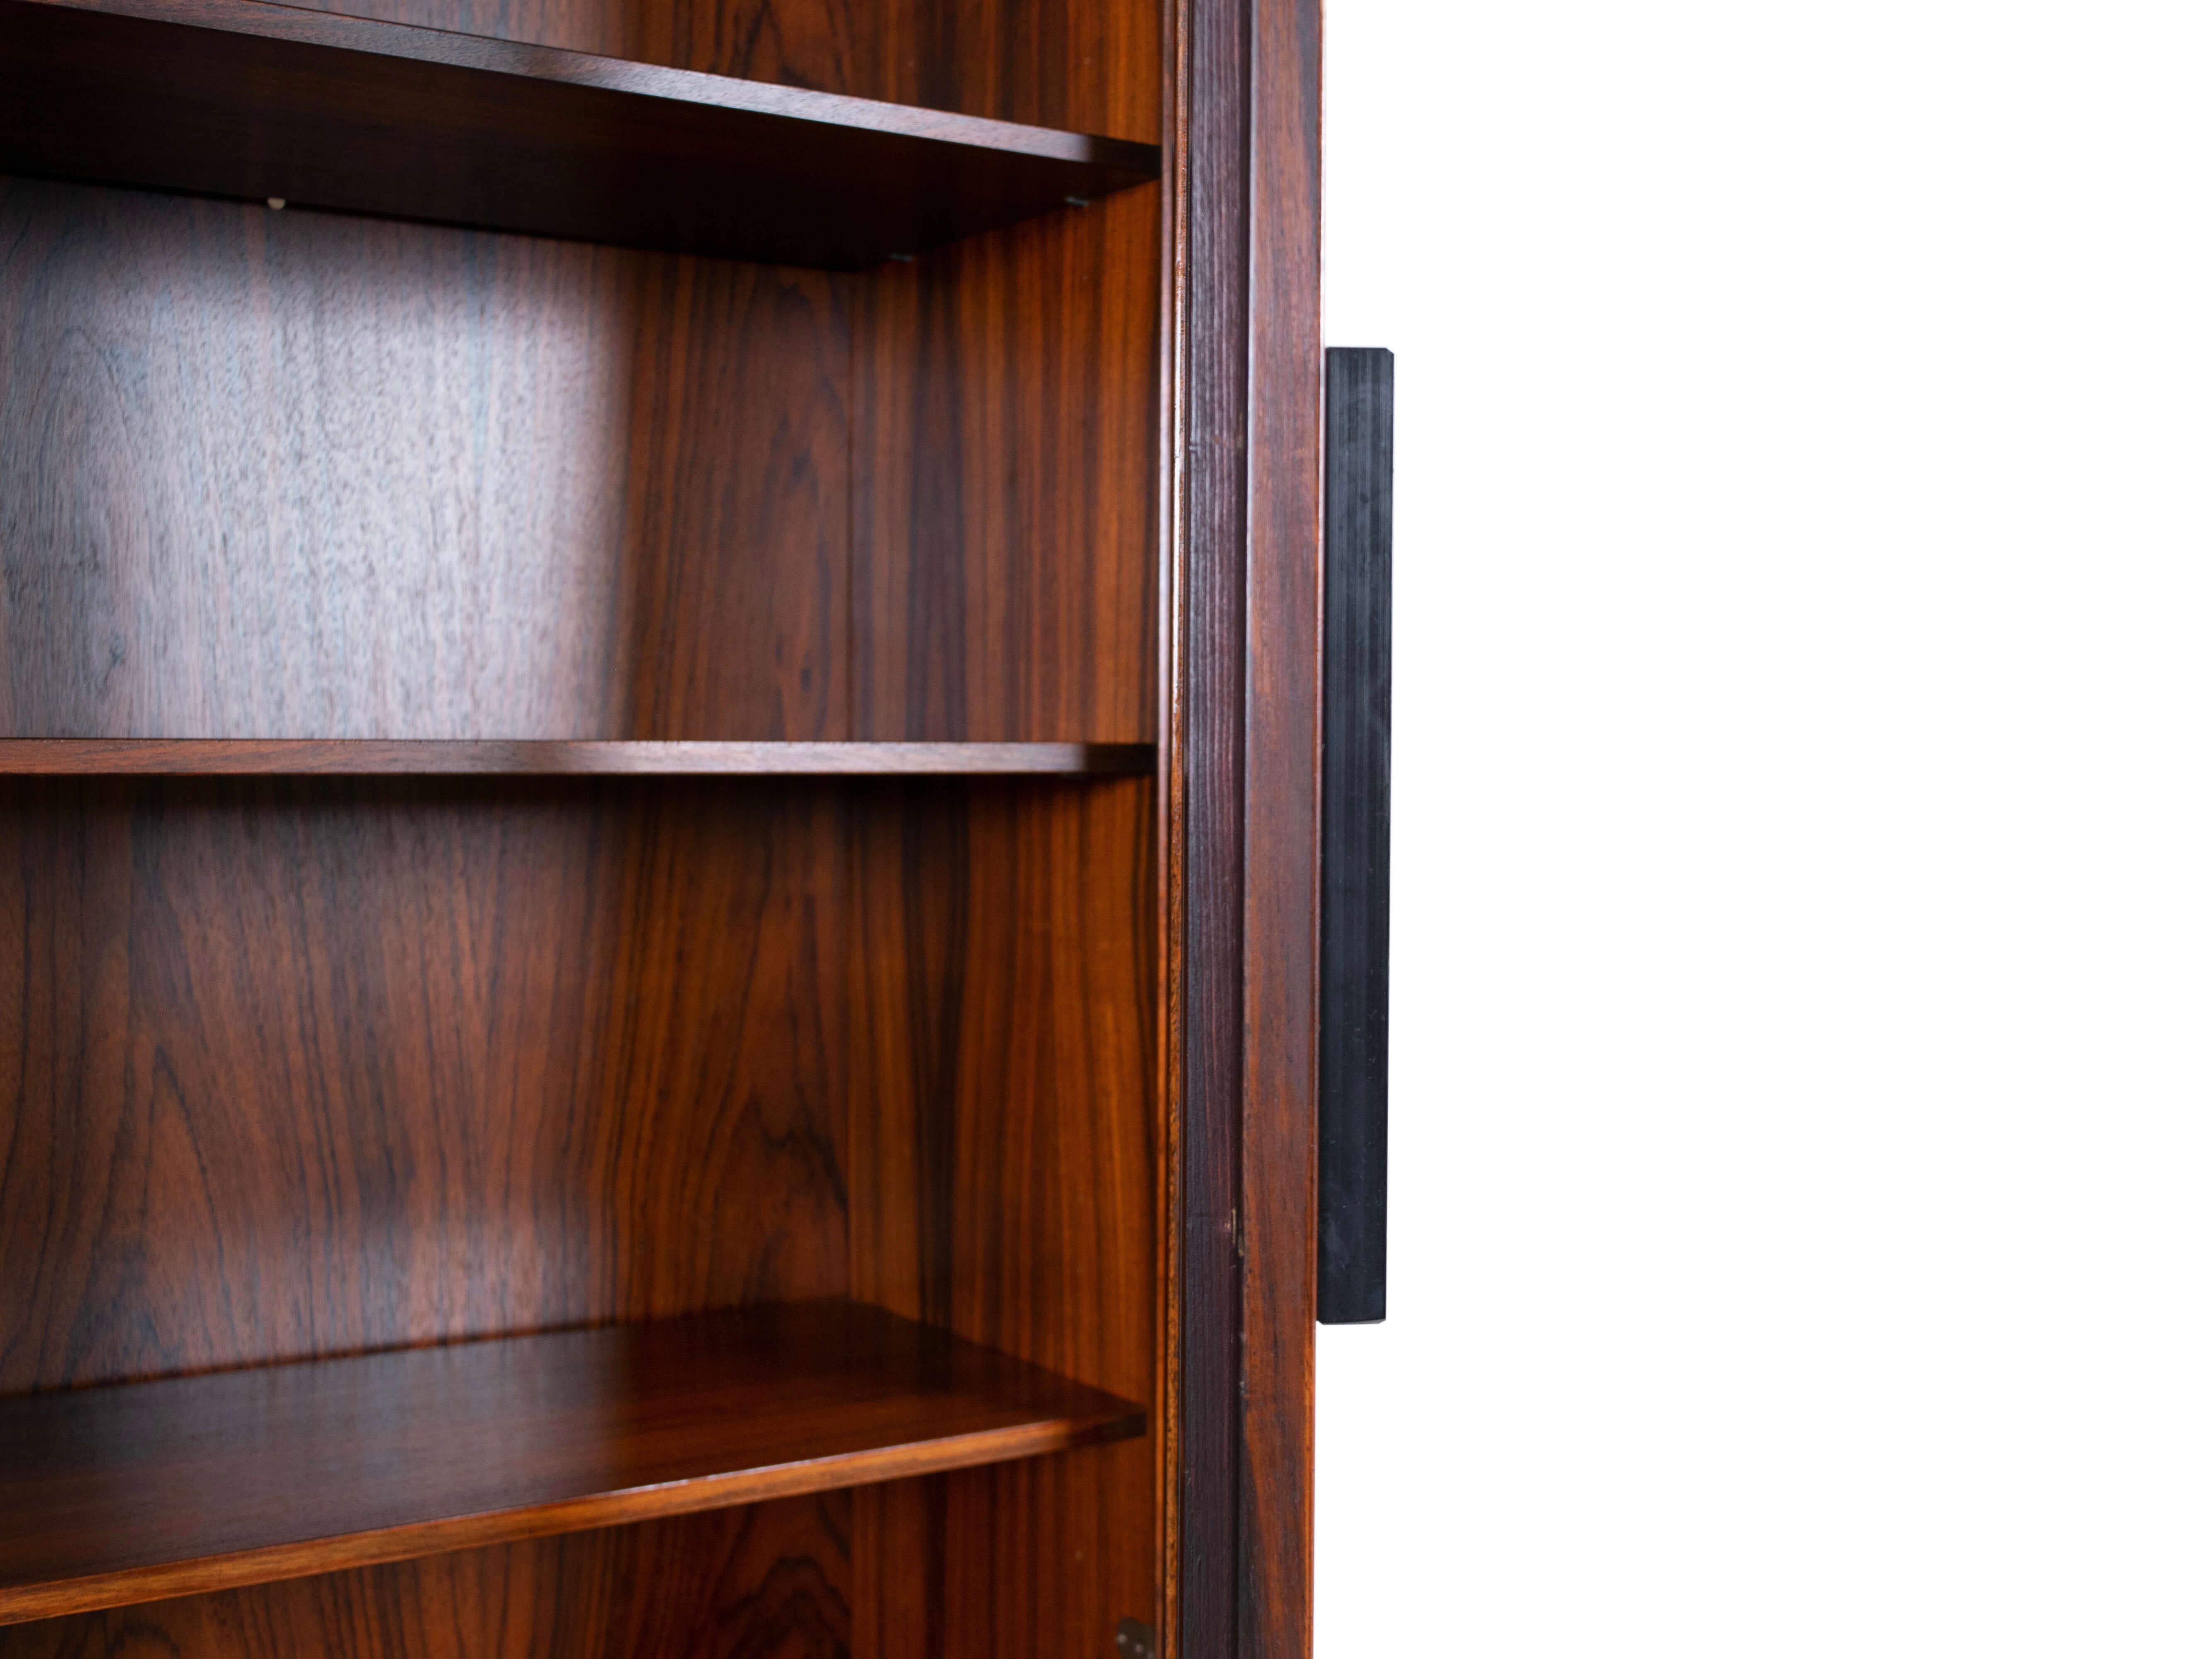 Wall Unit by Ib Kofod-Larsen for Faarup Møbelfabrik in Rosewood, Denmark 1960s For Sale 2